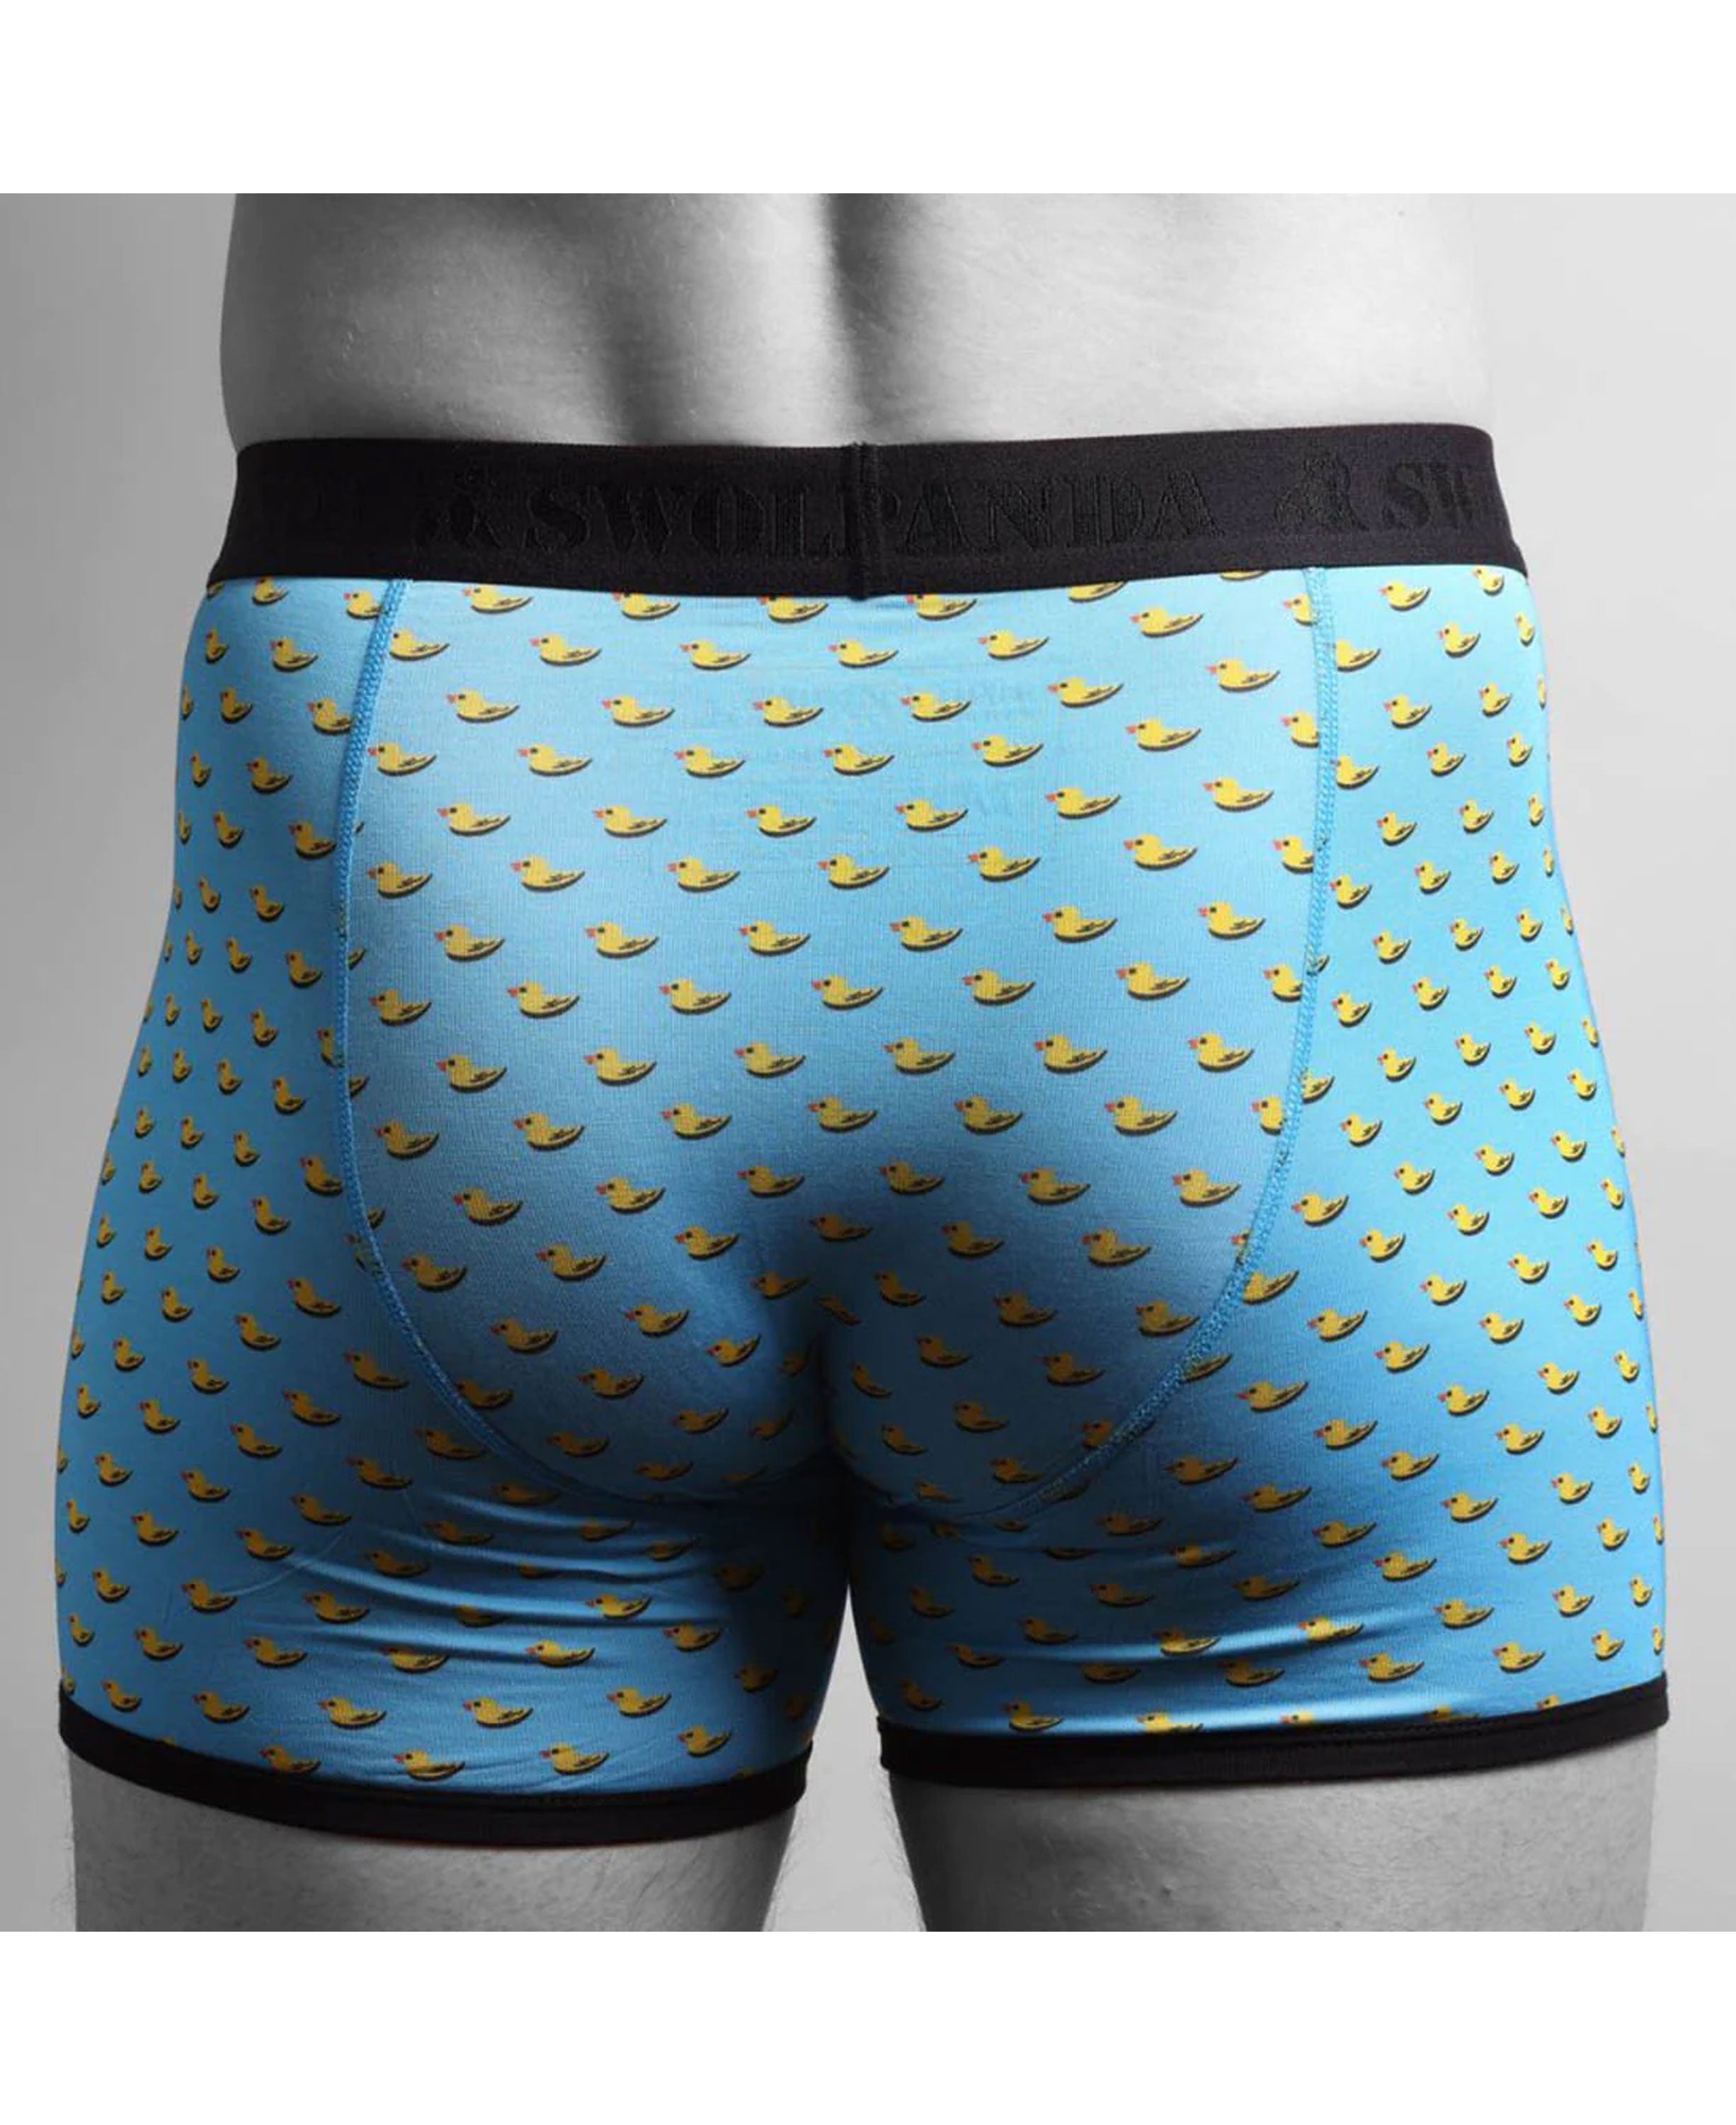 Bamboo Boxers - Duck/Black Band